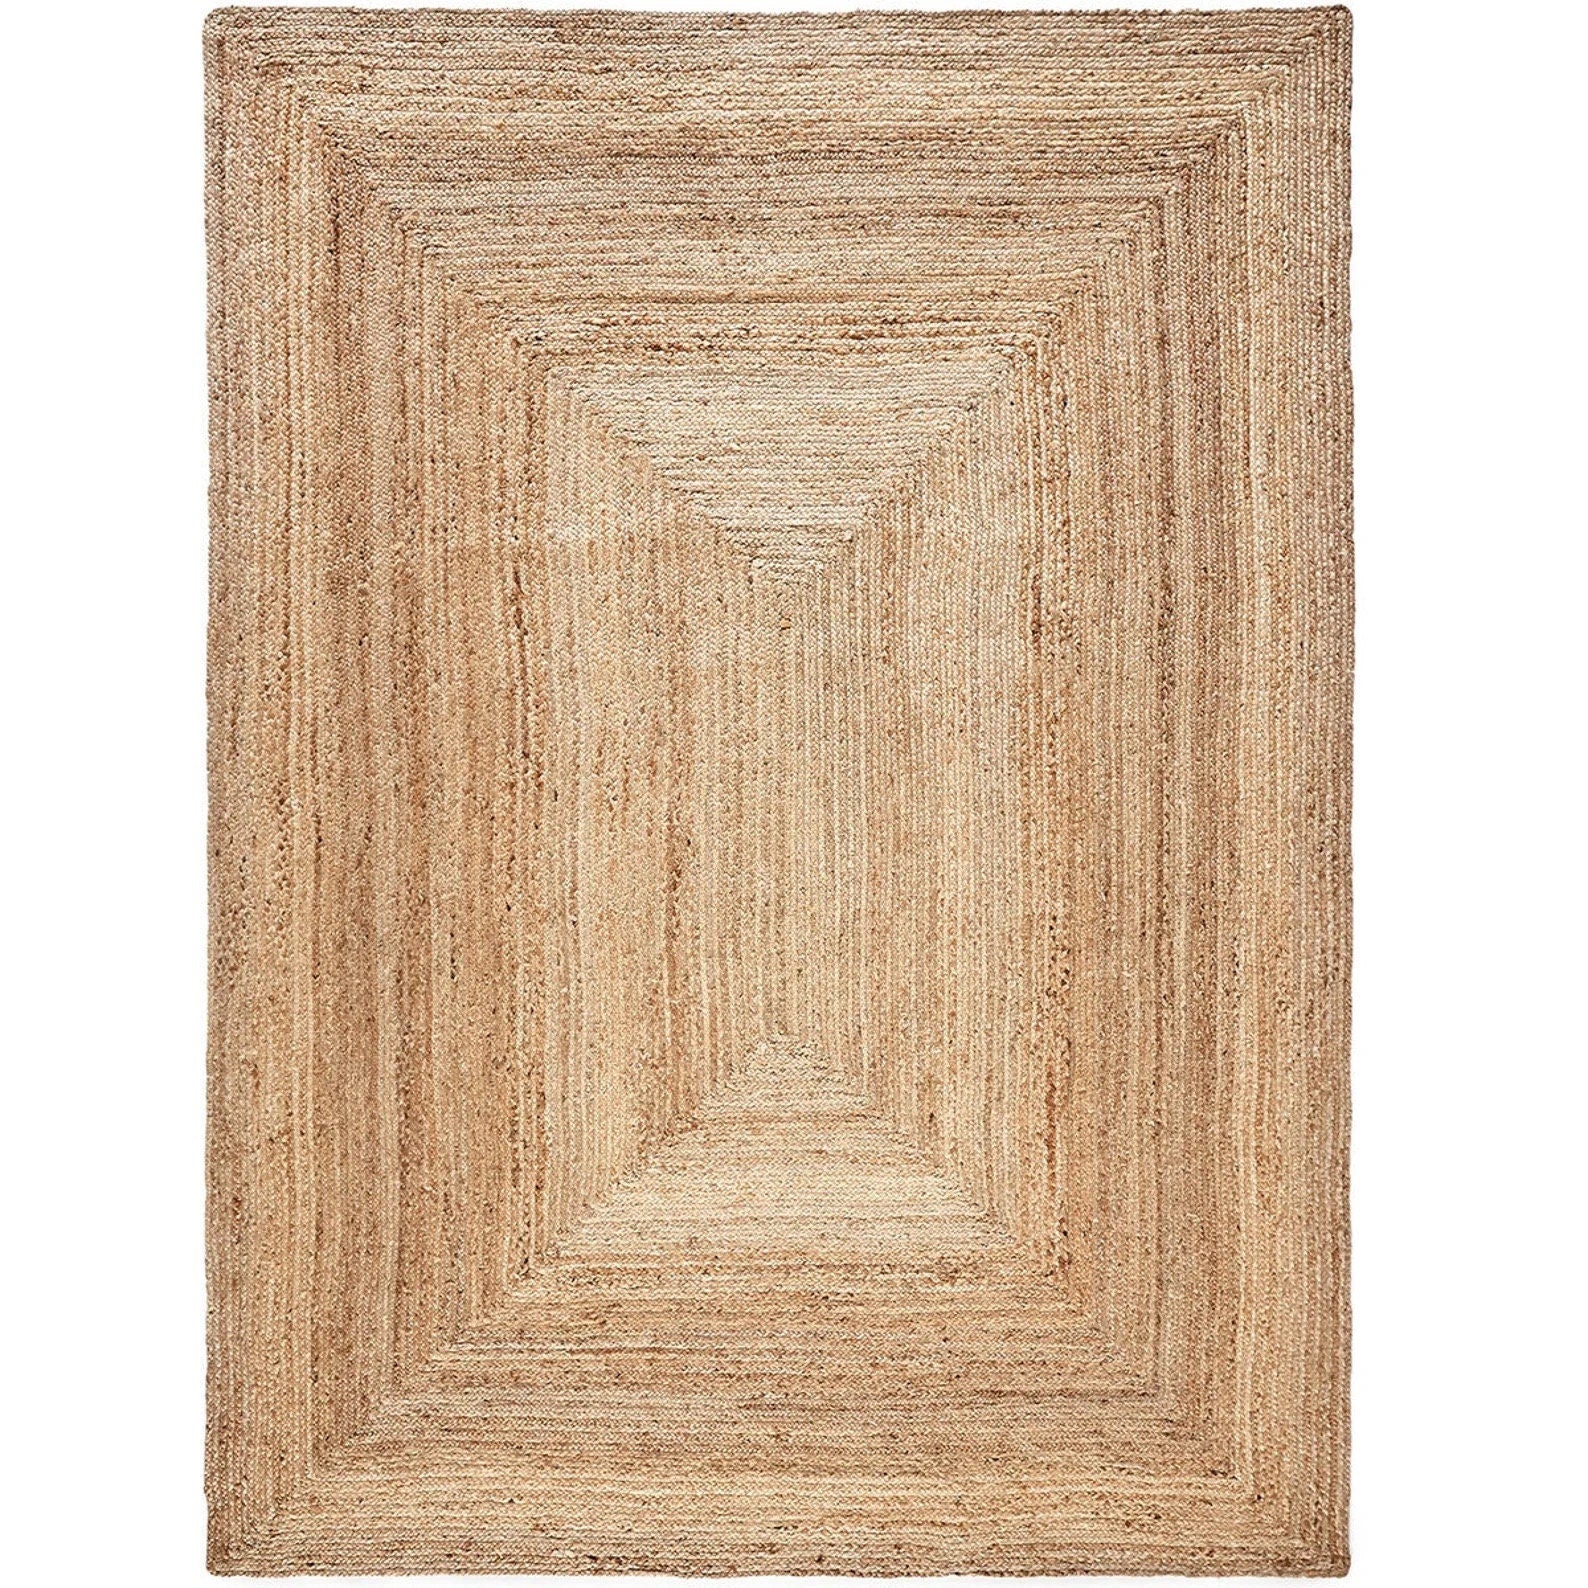 The Knitted Co. 100% Jute Area Rug 5 Feet- Round Natural Fibers- Braided  Design Hand Woven Natural Carpet - Home Decor for Living Room Hallways